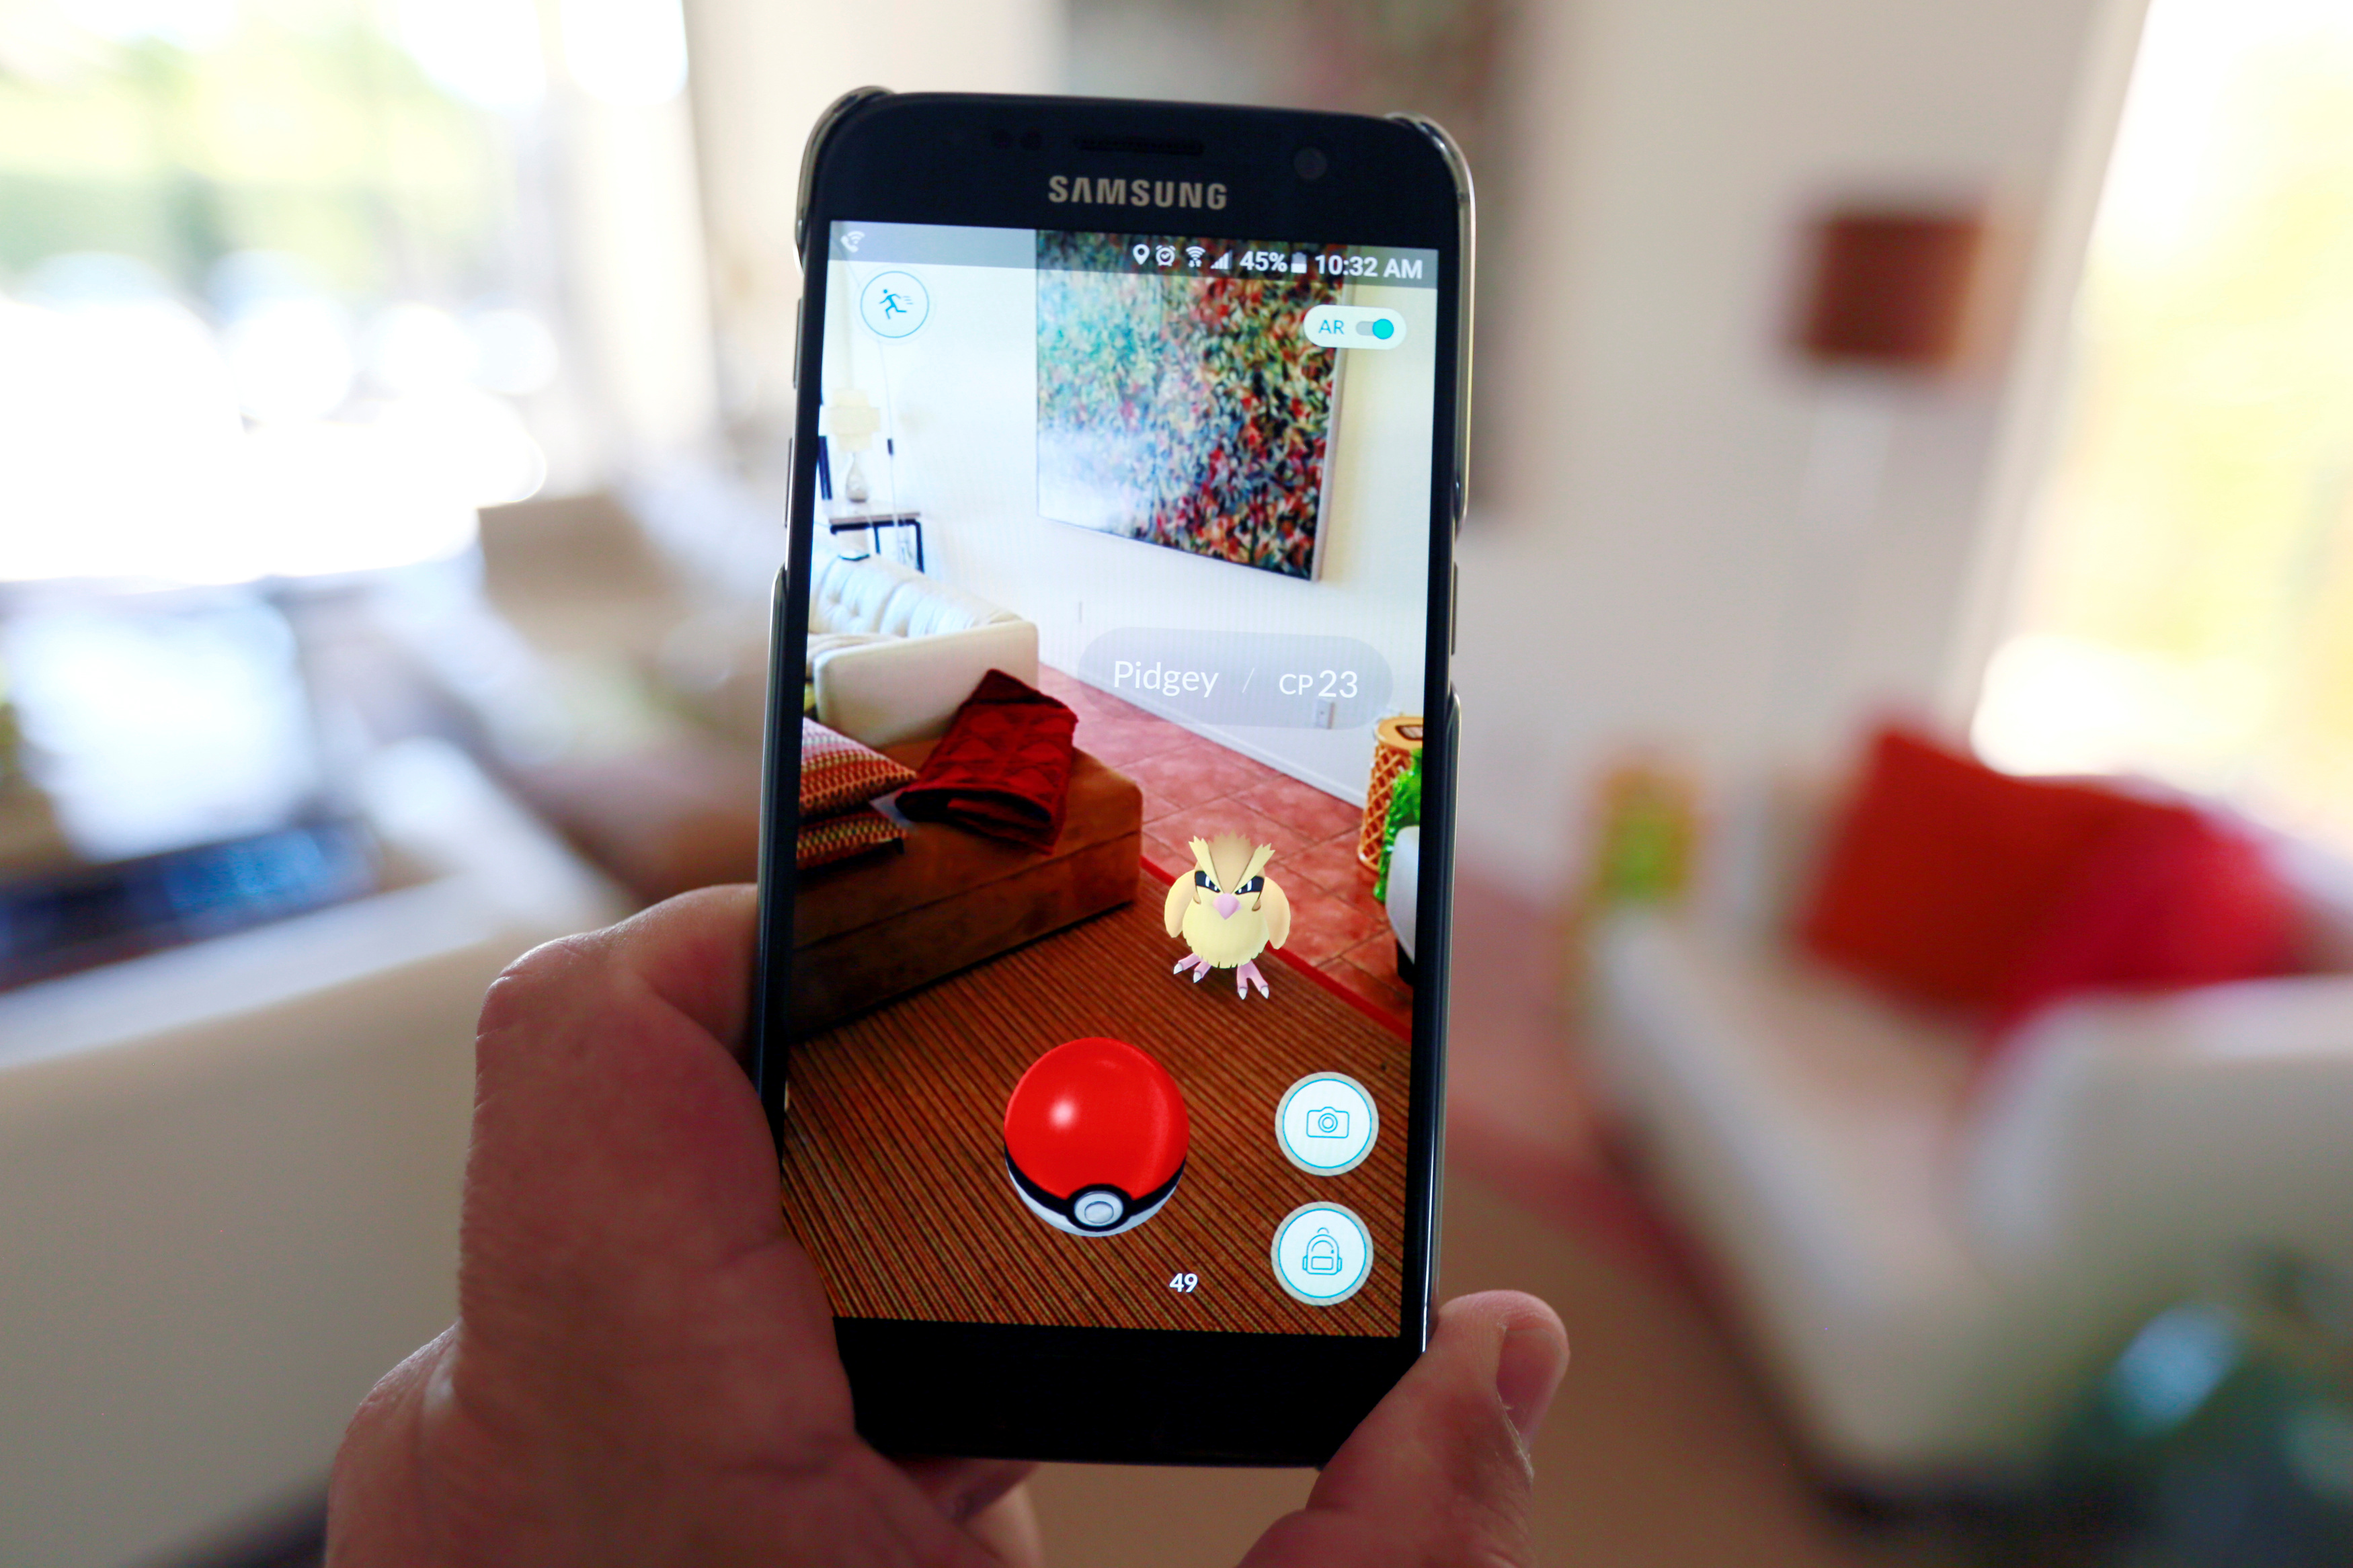 Pokémon Go is a Game-Changer, and Why We've #GottaCatchThemAll